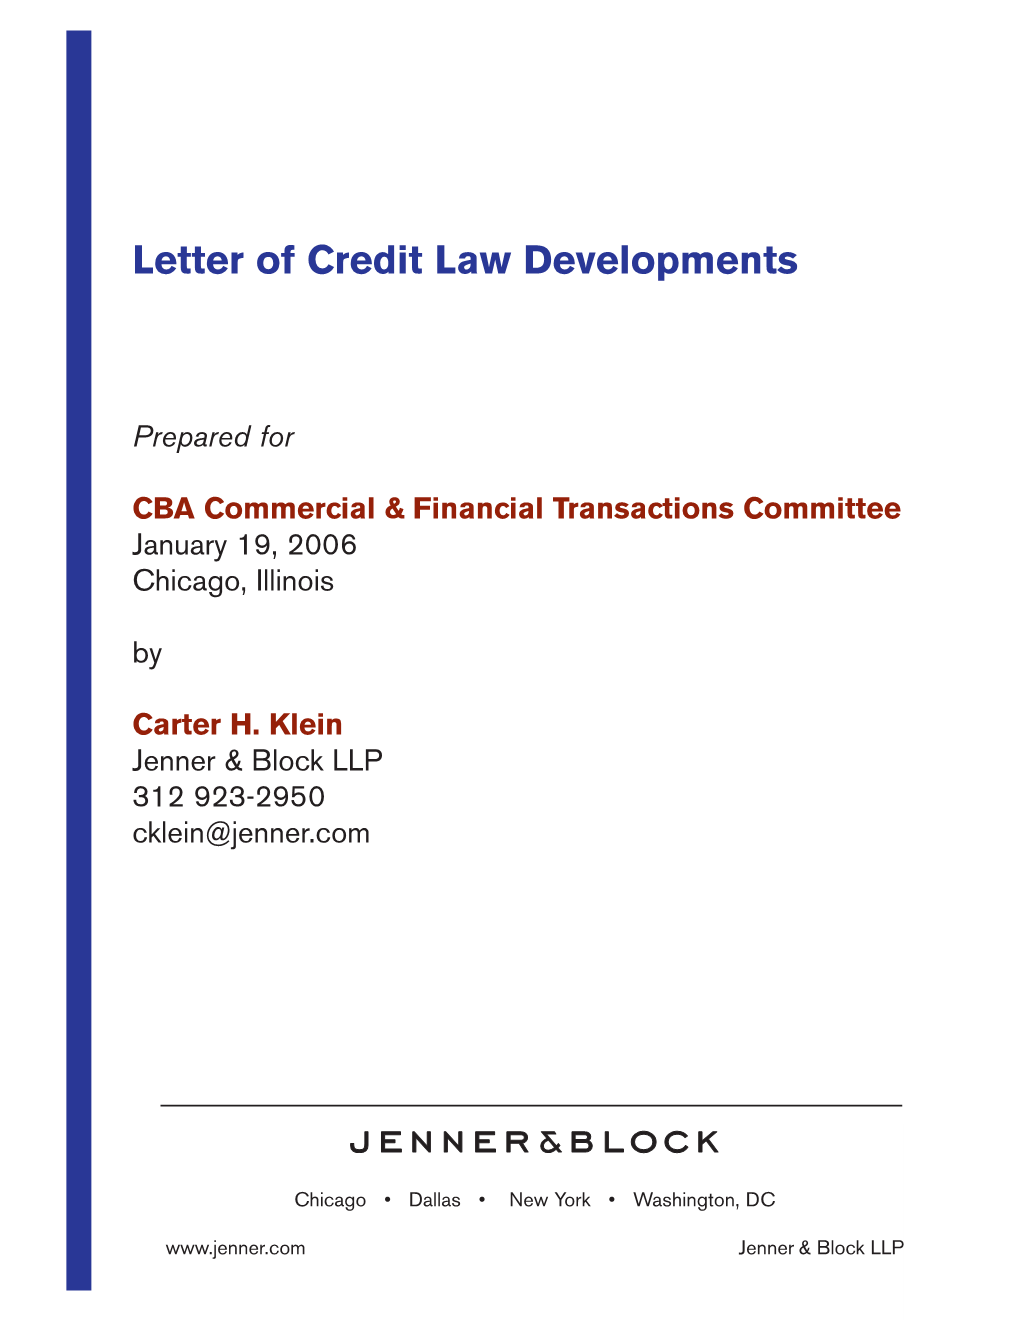 Letter of Credit Law Developments